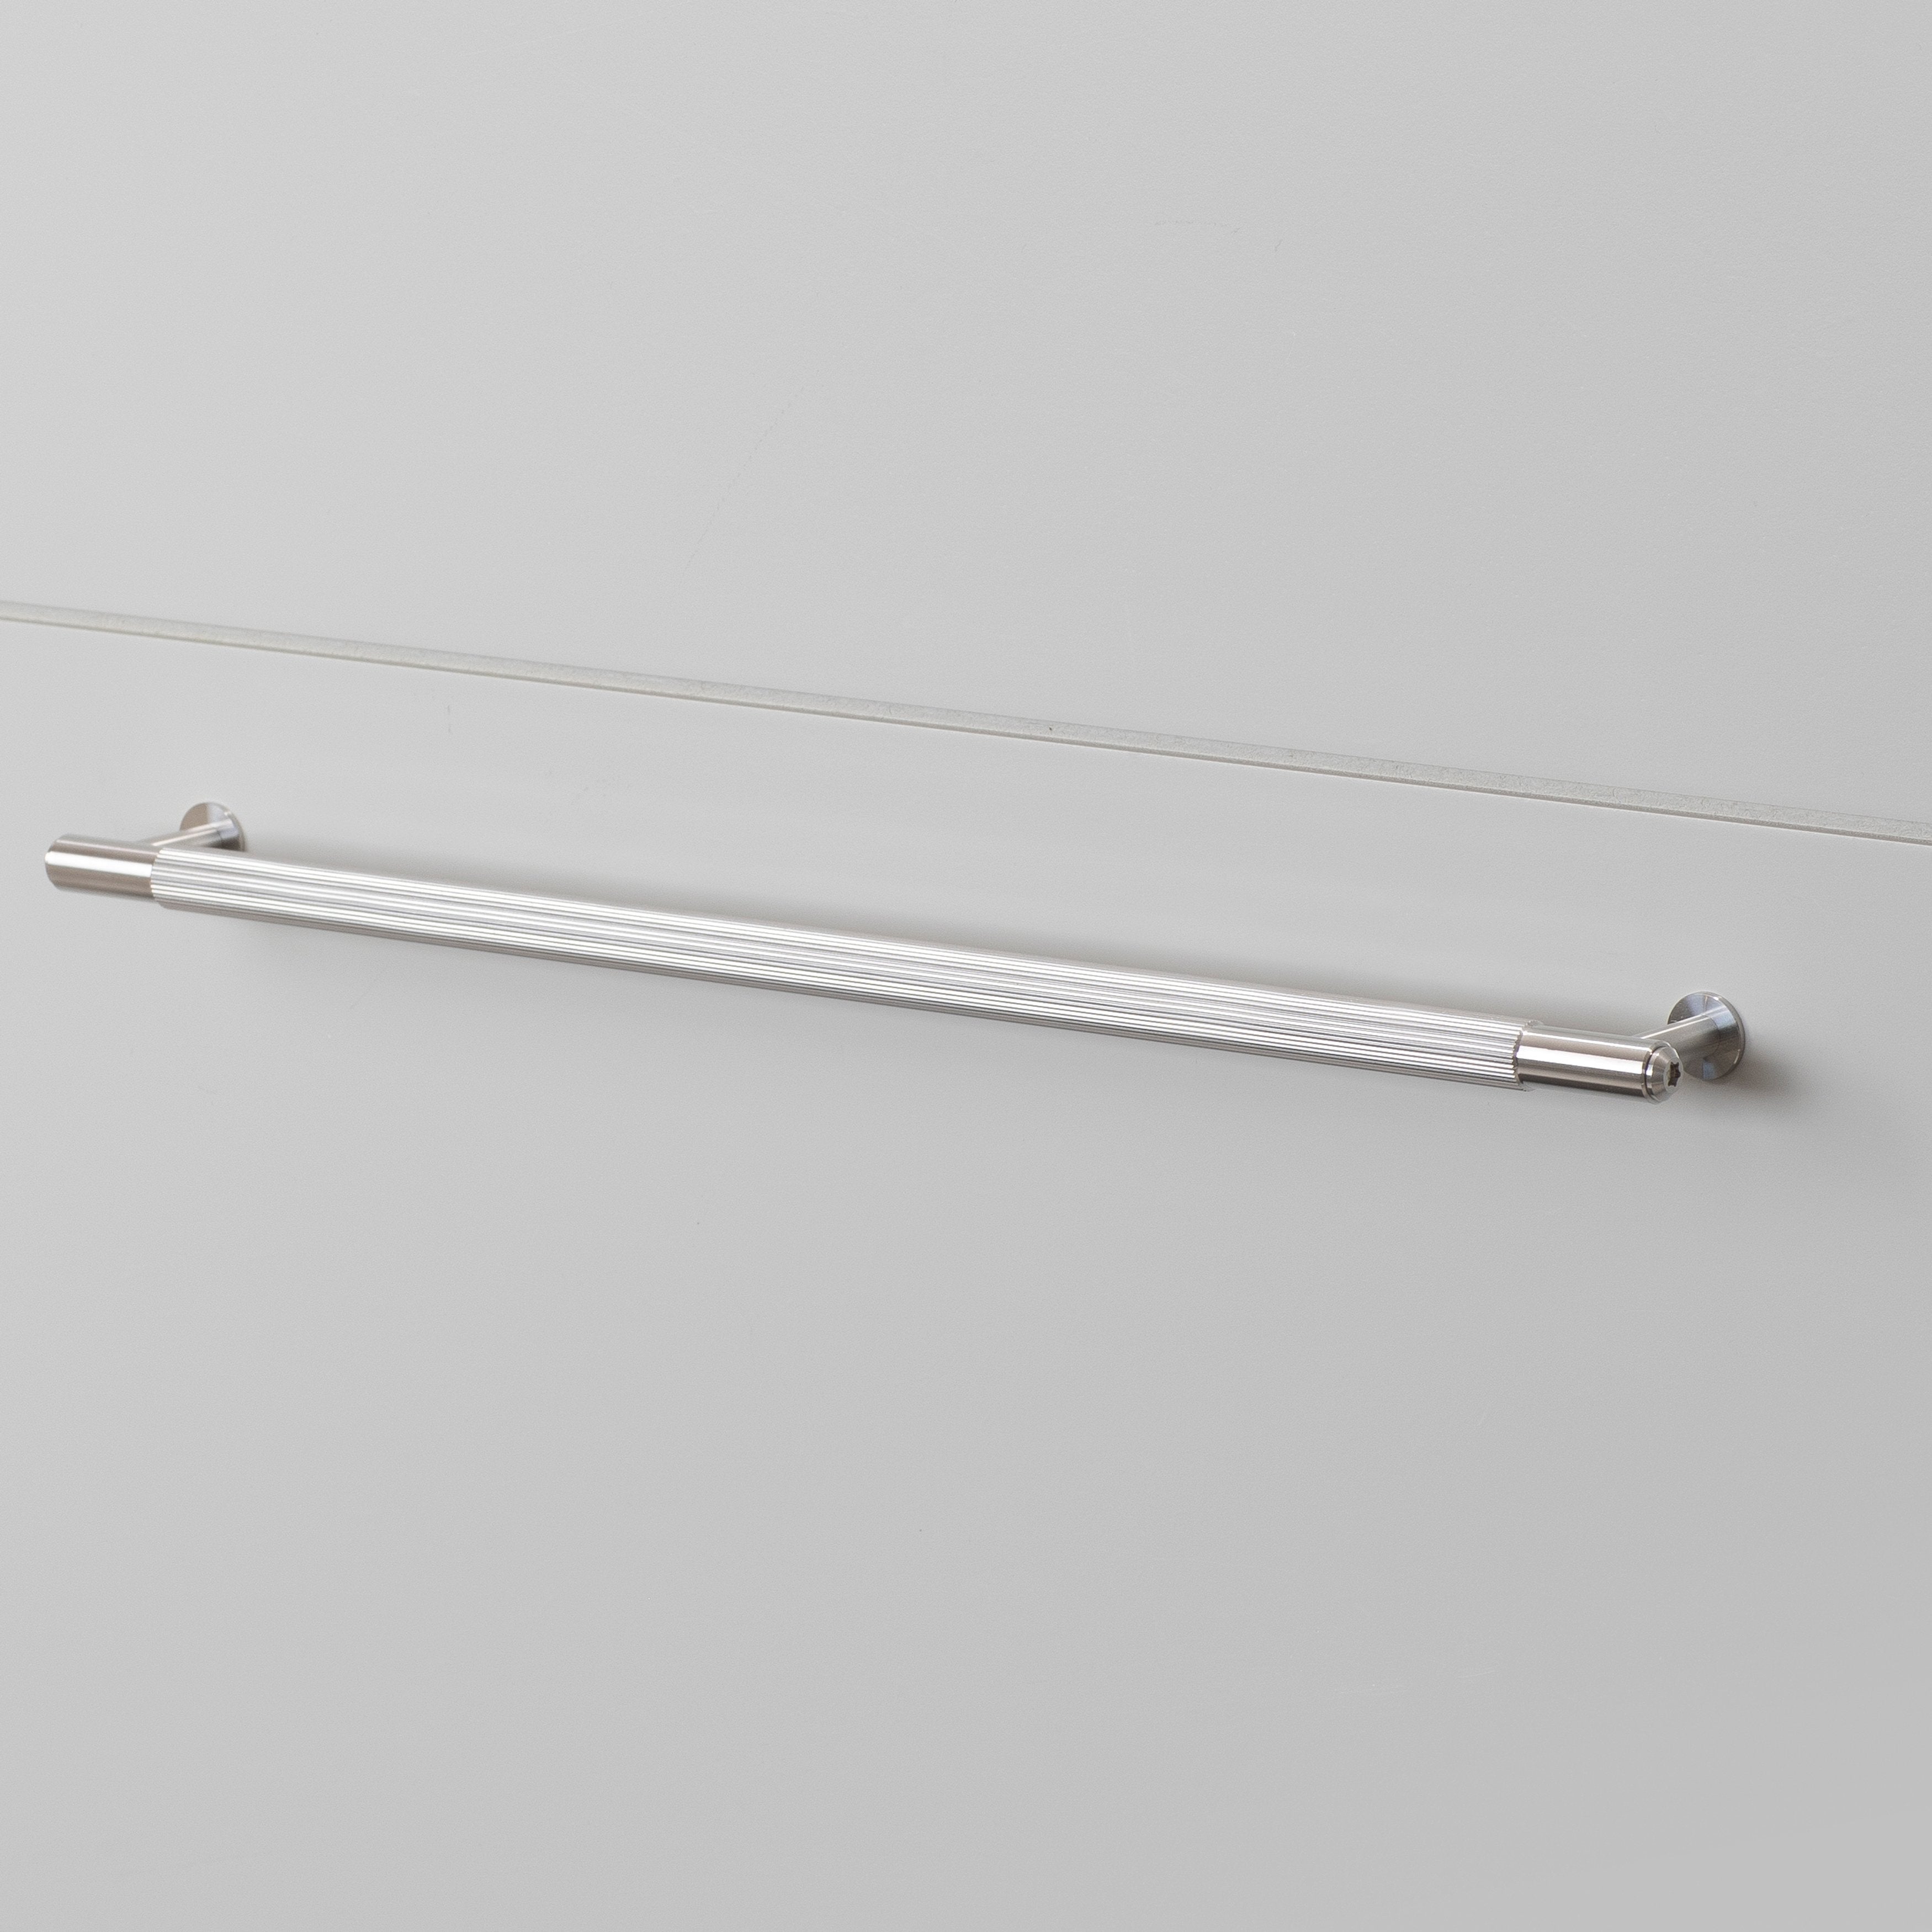 PULL BAR / LINEAR / STEEL - LARGE - No.42 Interiors